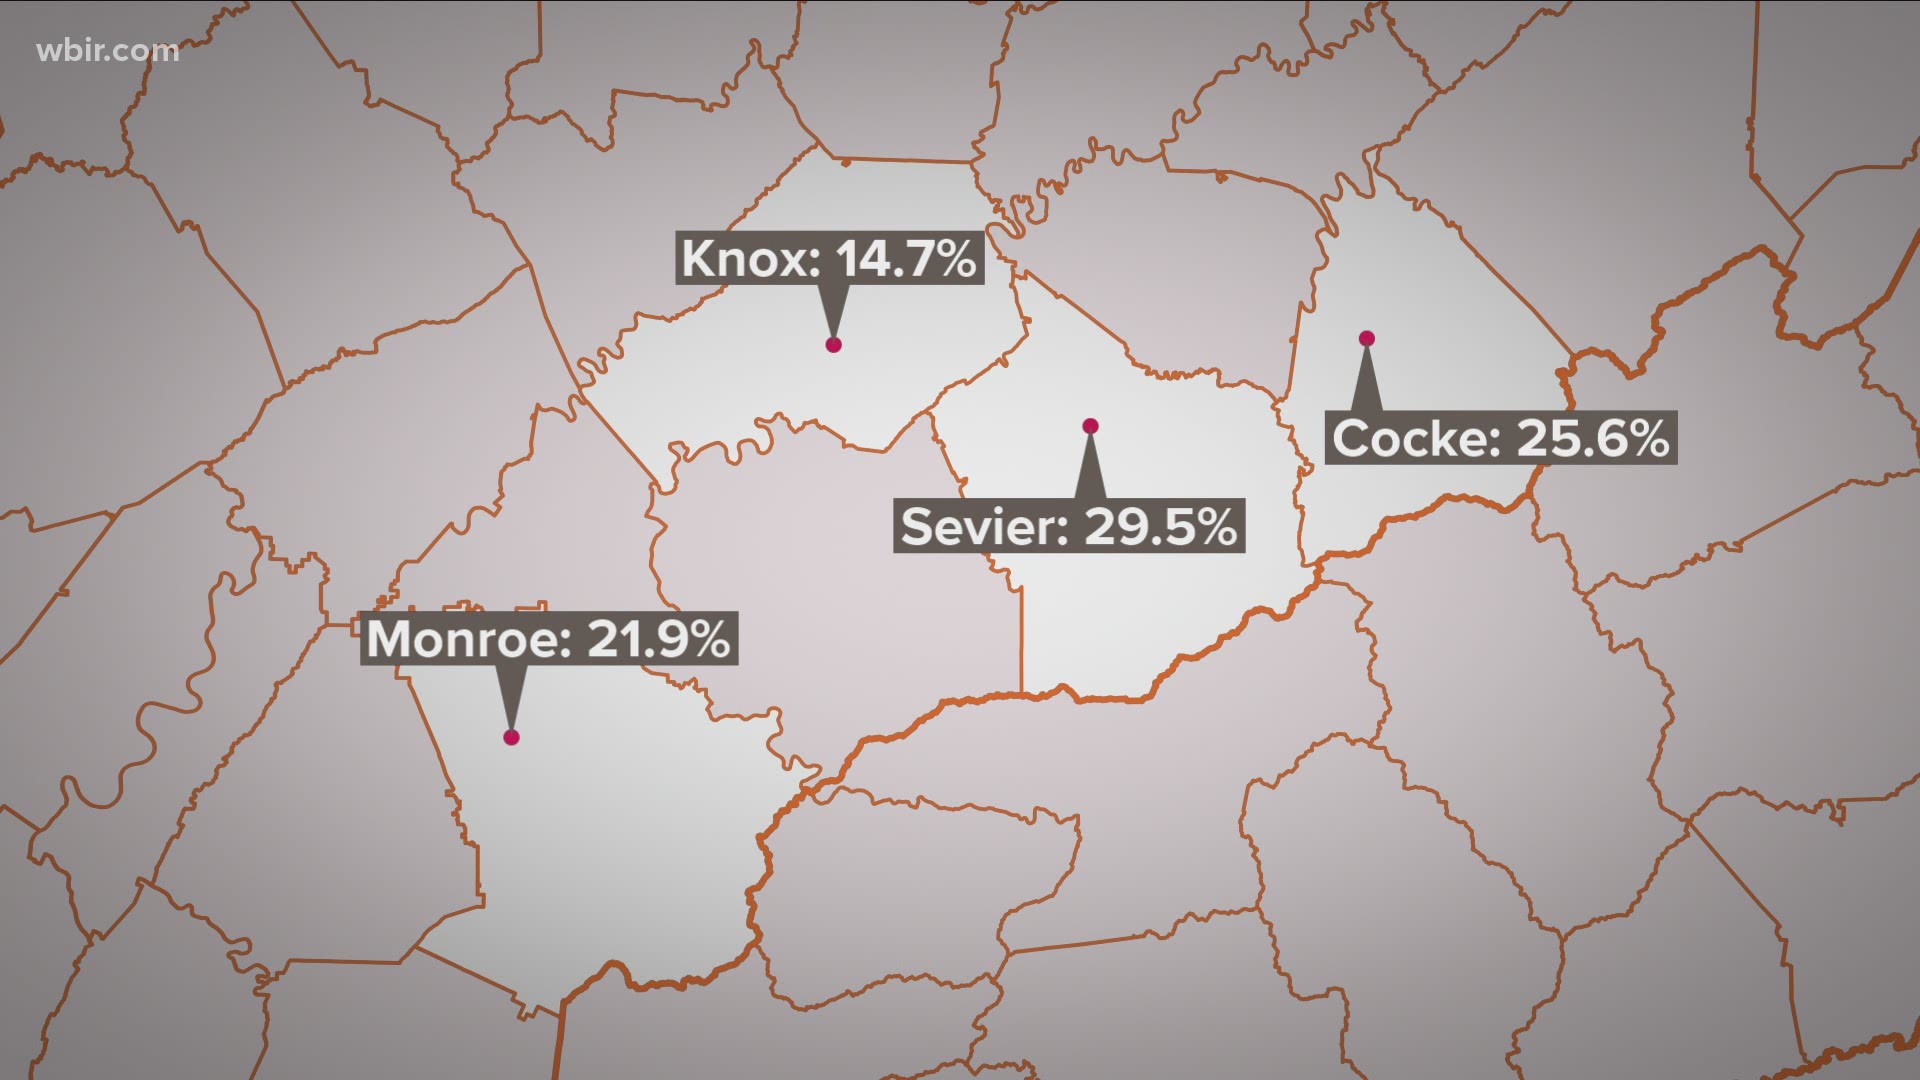 Sevier County now has the highest unemployment rate in Tennessee at 29.5 percent.